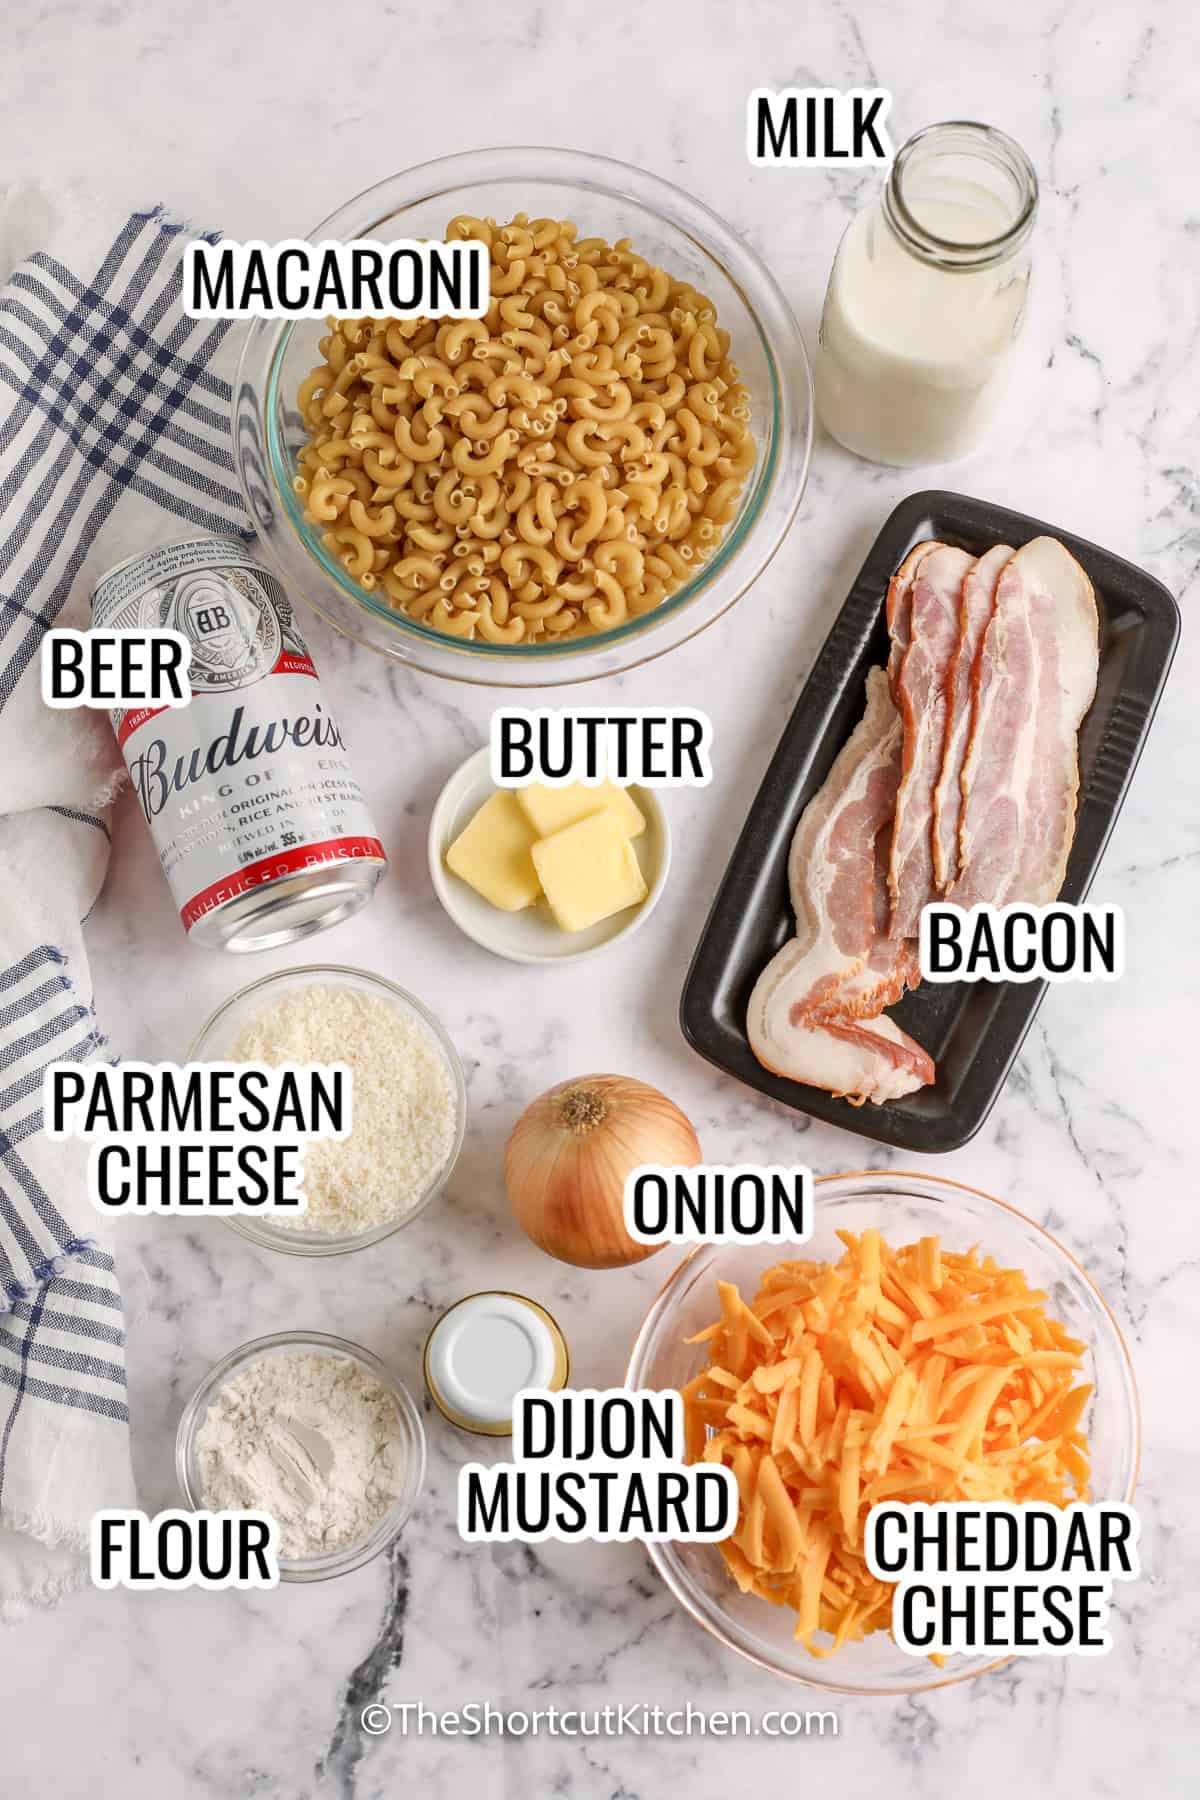 ingredients assembled to make beer mac and cheese including macaroni, beer, cheddar cheese, parmesan cheese, milk, bacon, onion, dijon mustard, flour, and butter